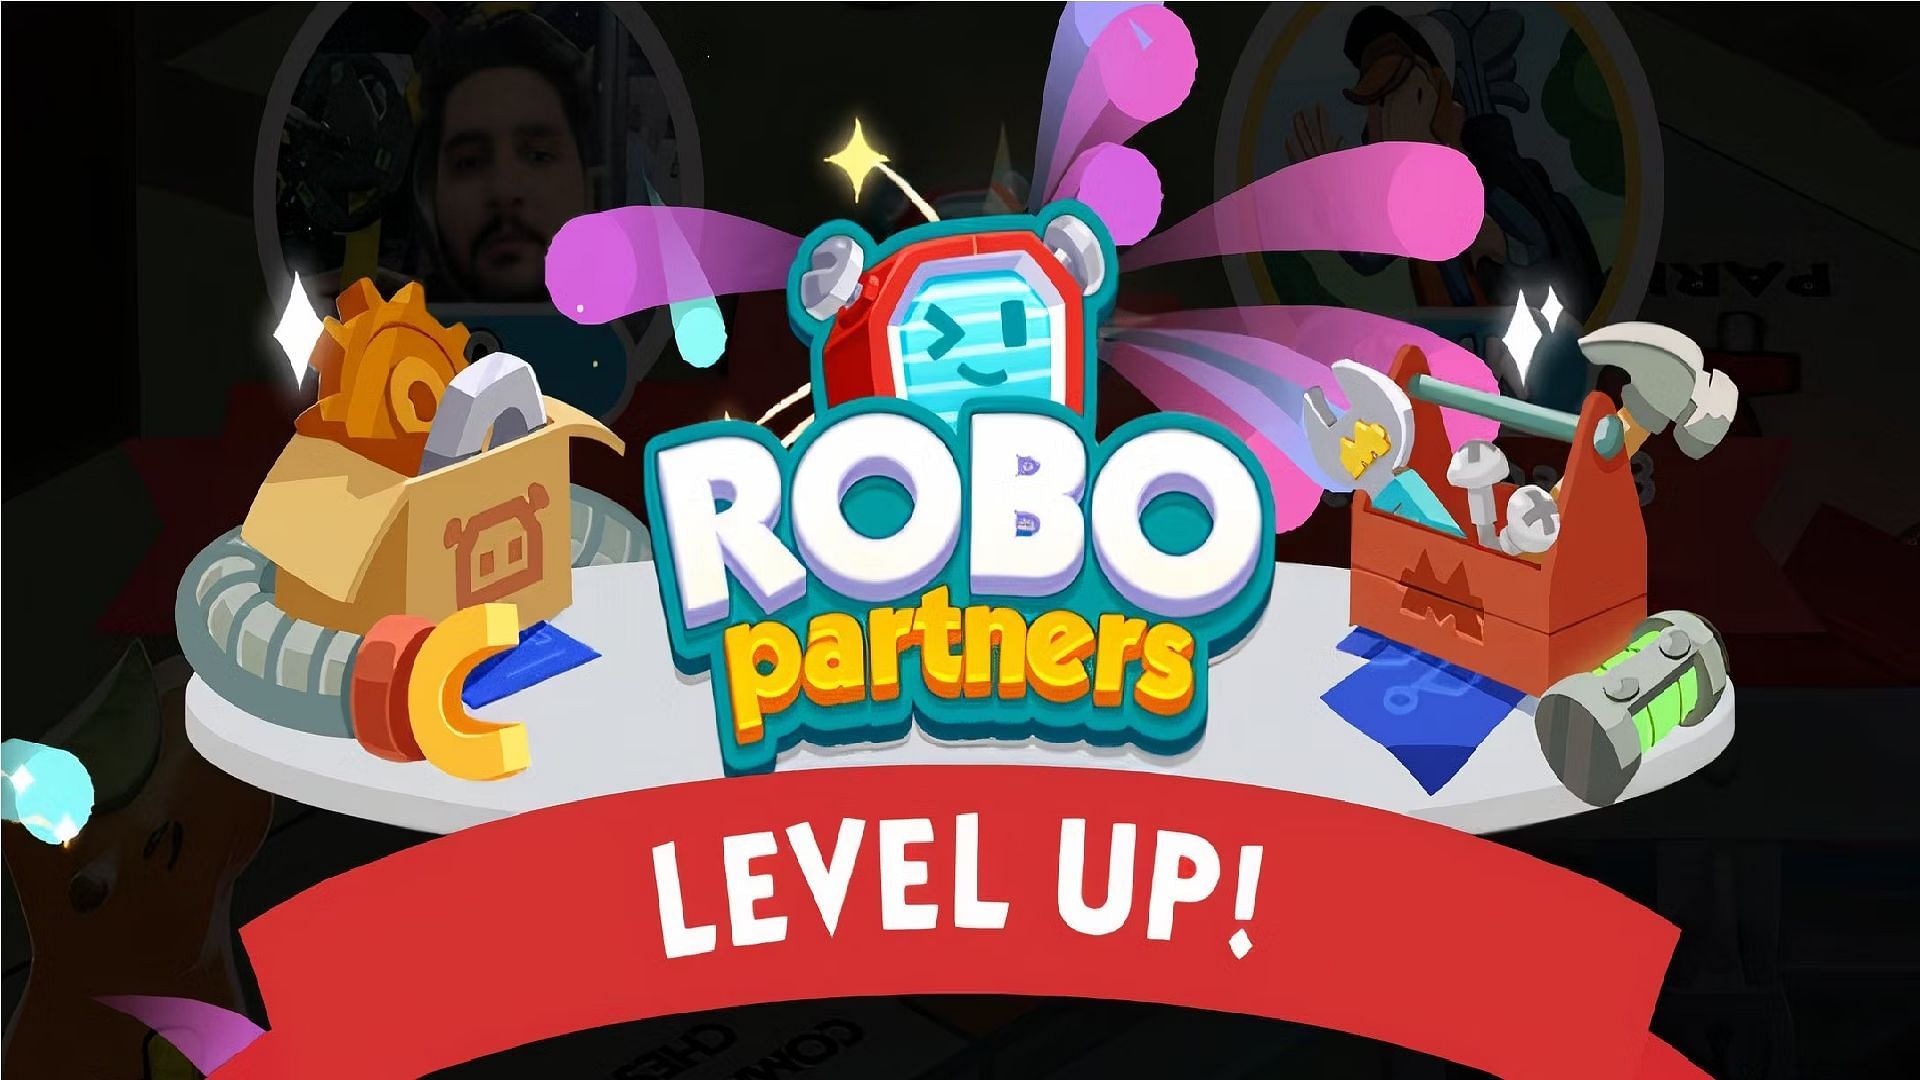 Robo Partners is the latest Partner event in Monopoly Go (Image via Scopely)